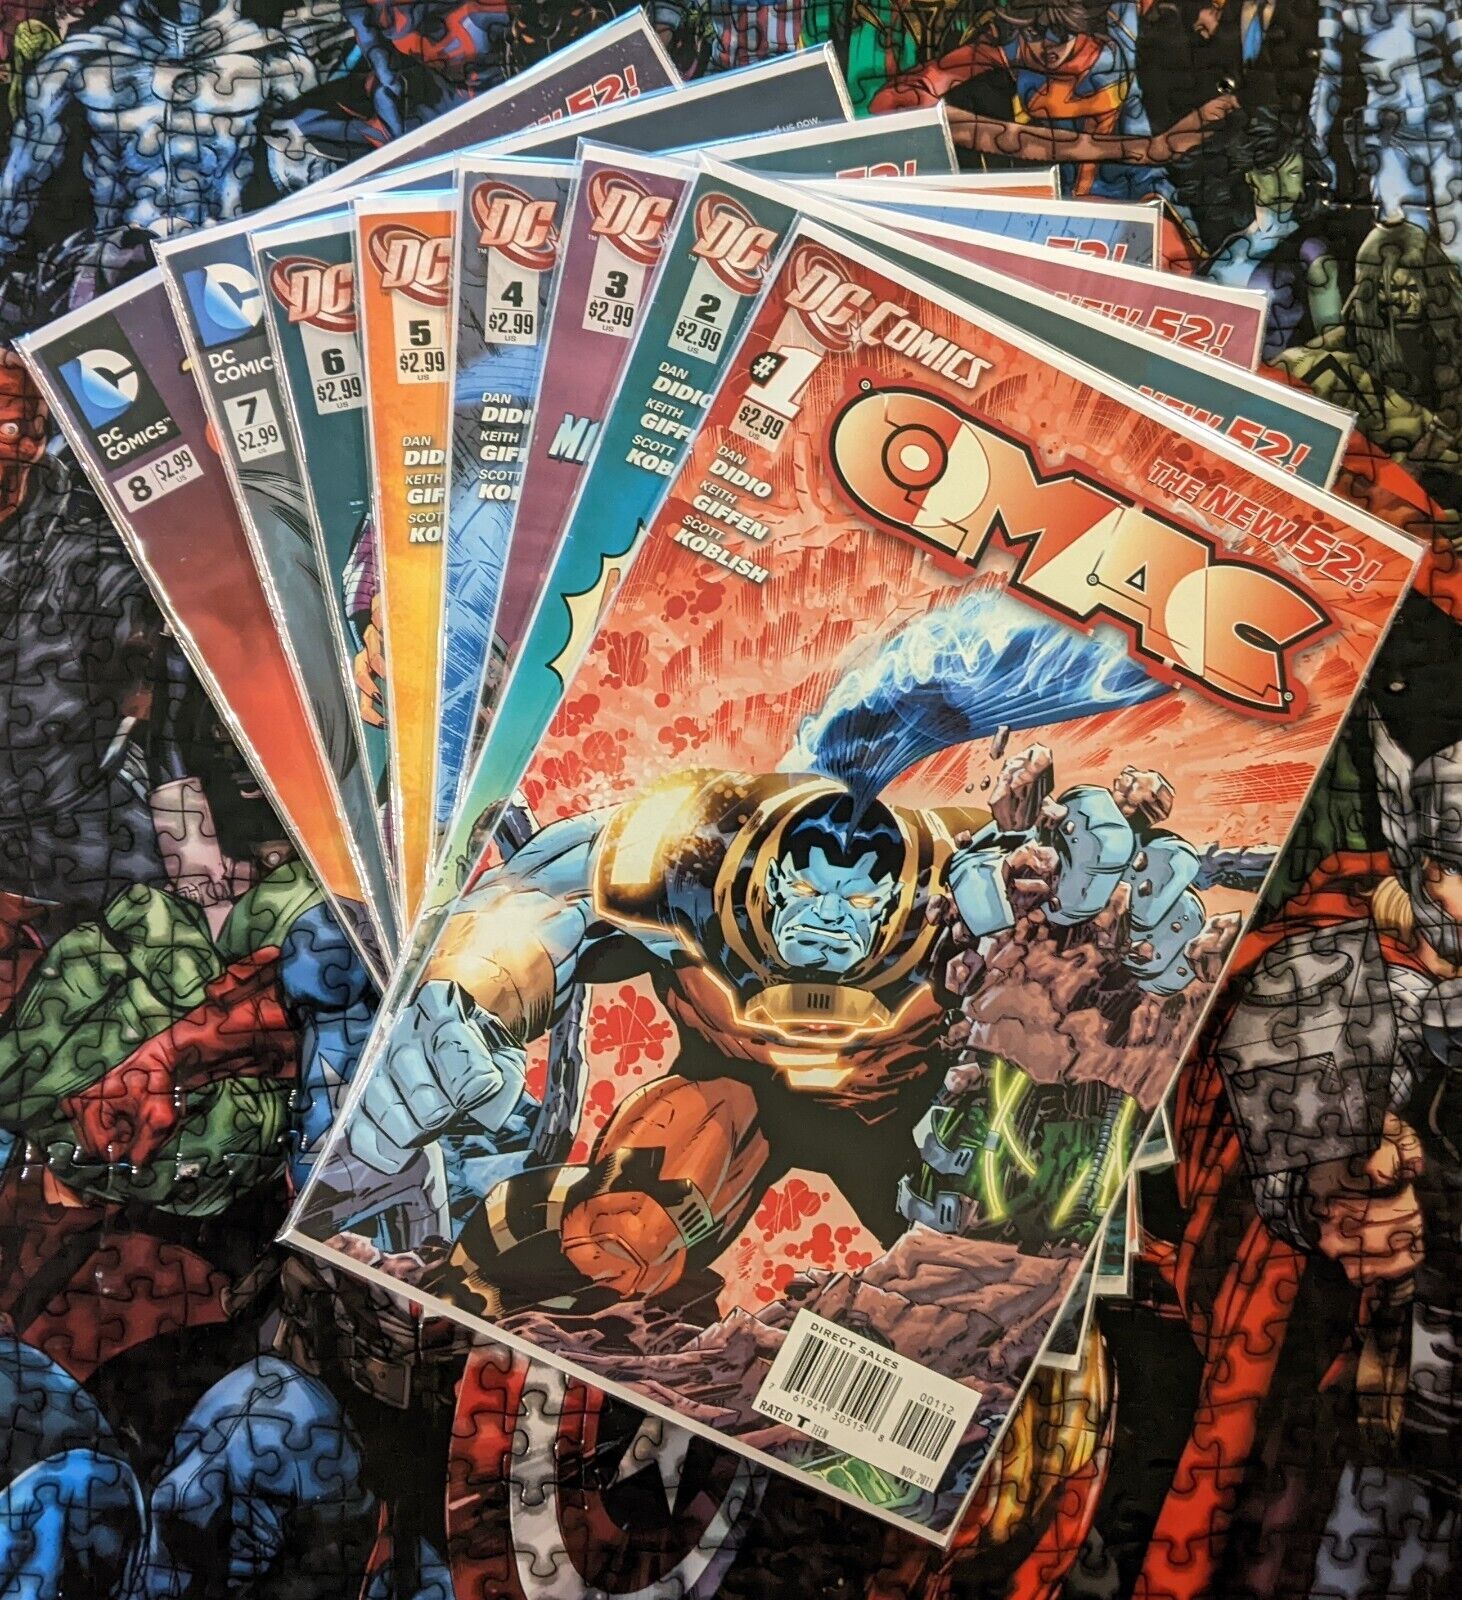 O.M.A.C.  #1 #2 #3 #4 #5 #6 #7 #8 COMPLETE 2011 NEW 52 DC COMICS (3BY)